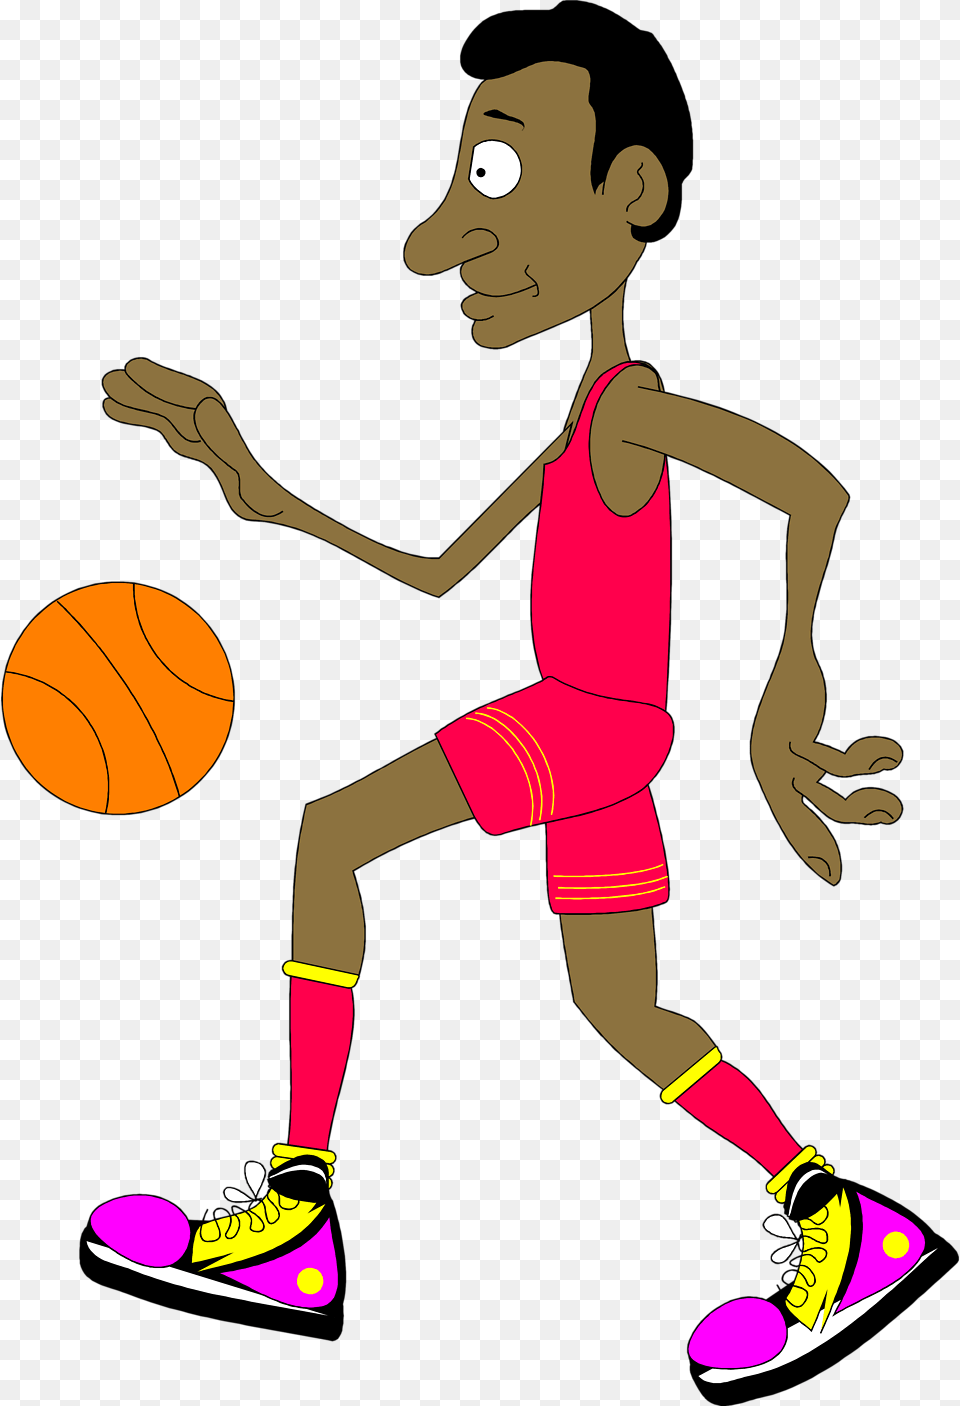 Basketball Stock Photo Illustration Of A Basketball, Person, Face, Head, Playing Basketball Free Transparent Png